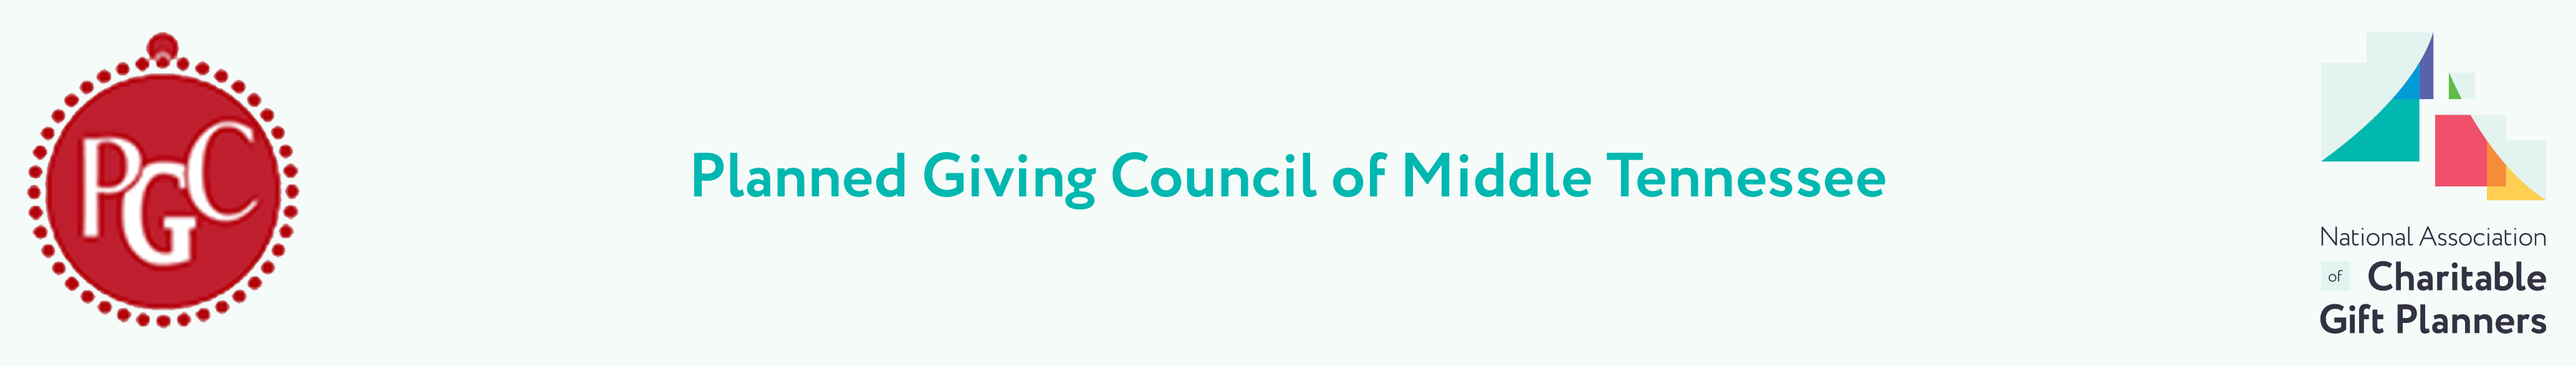 Planned Giving Council of Middle Tennessee Logo